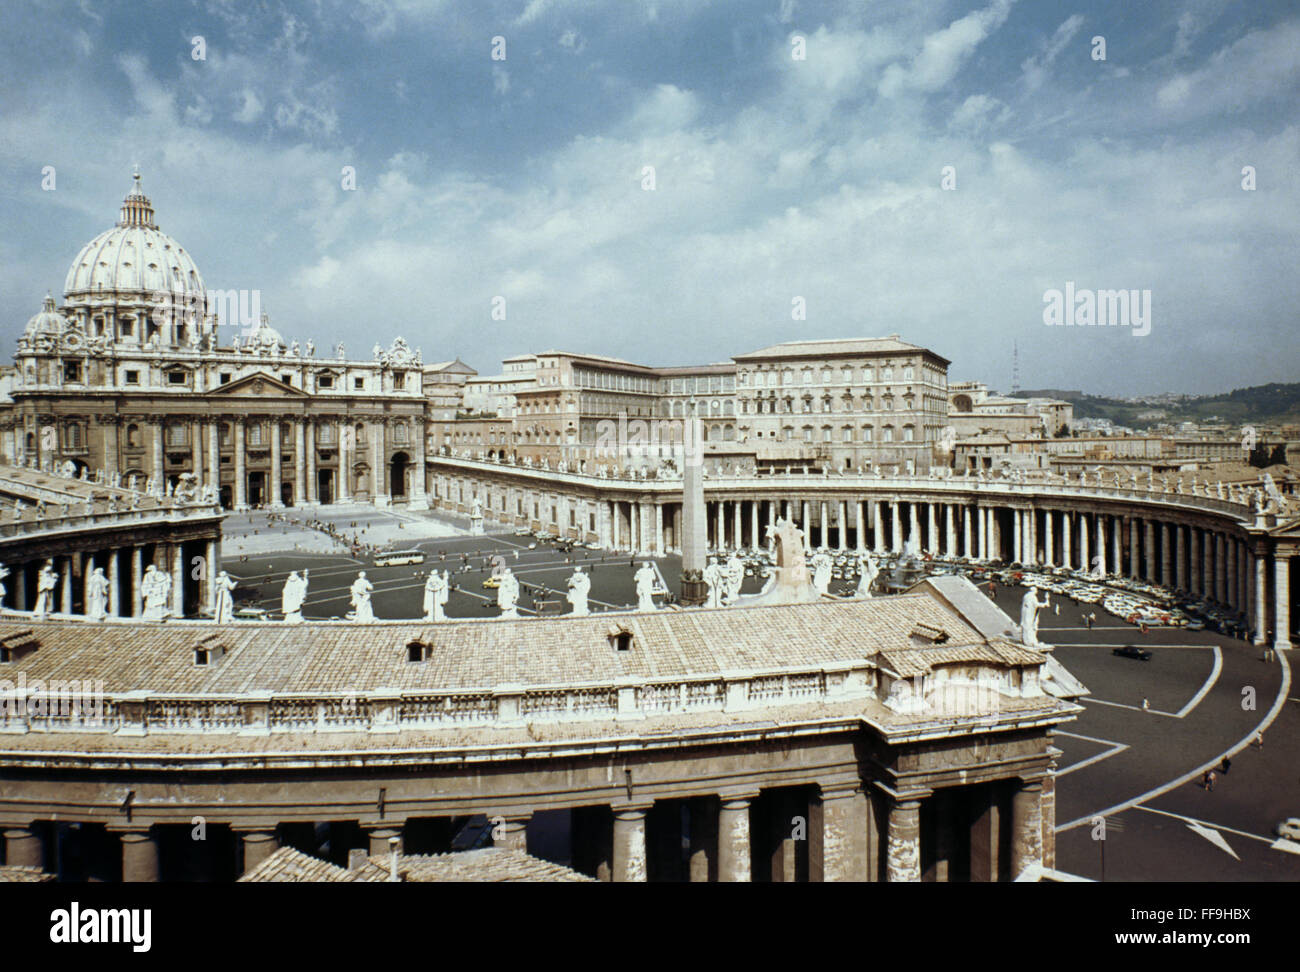 ST. PETER'S BASILICA. /nRome, Italy. Photograph. Stock Photo